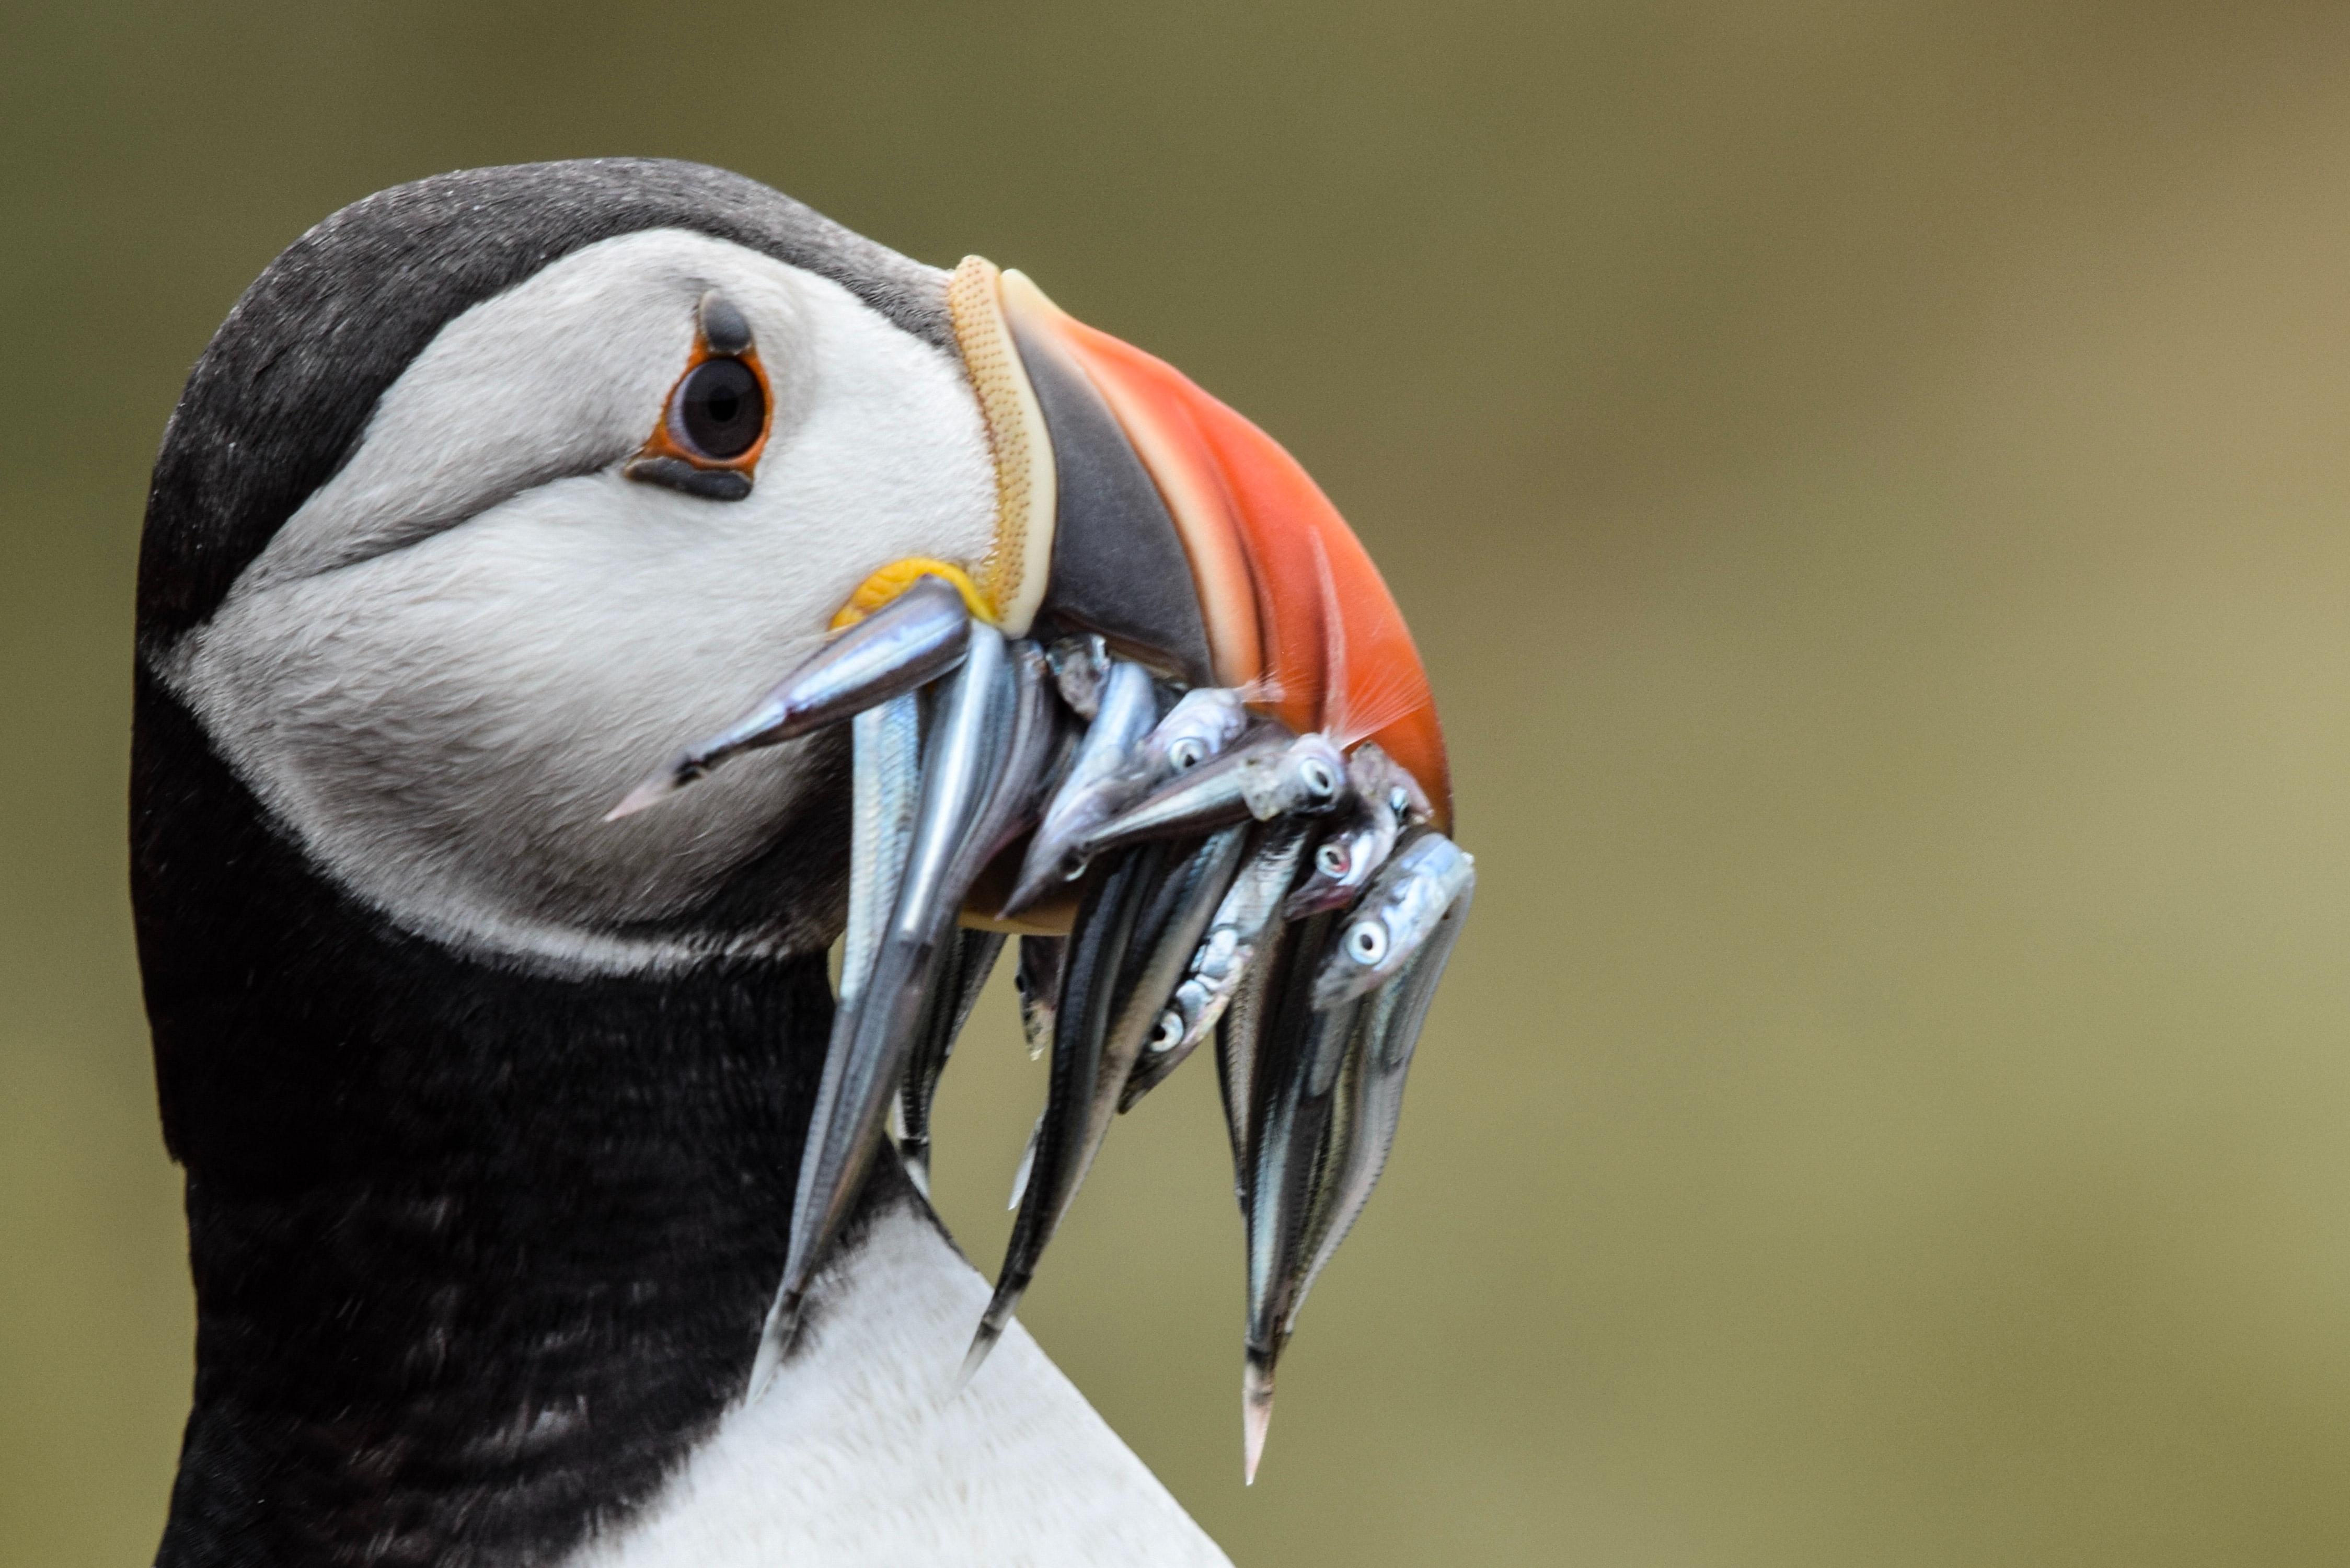 you can easily find puffins in Iceland during summer time